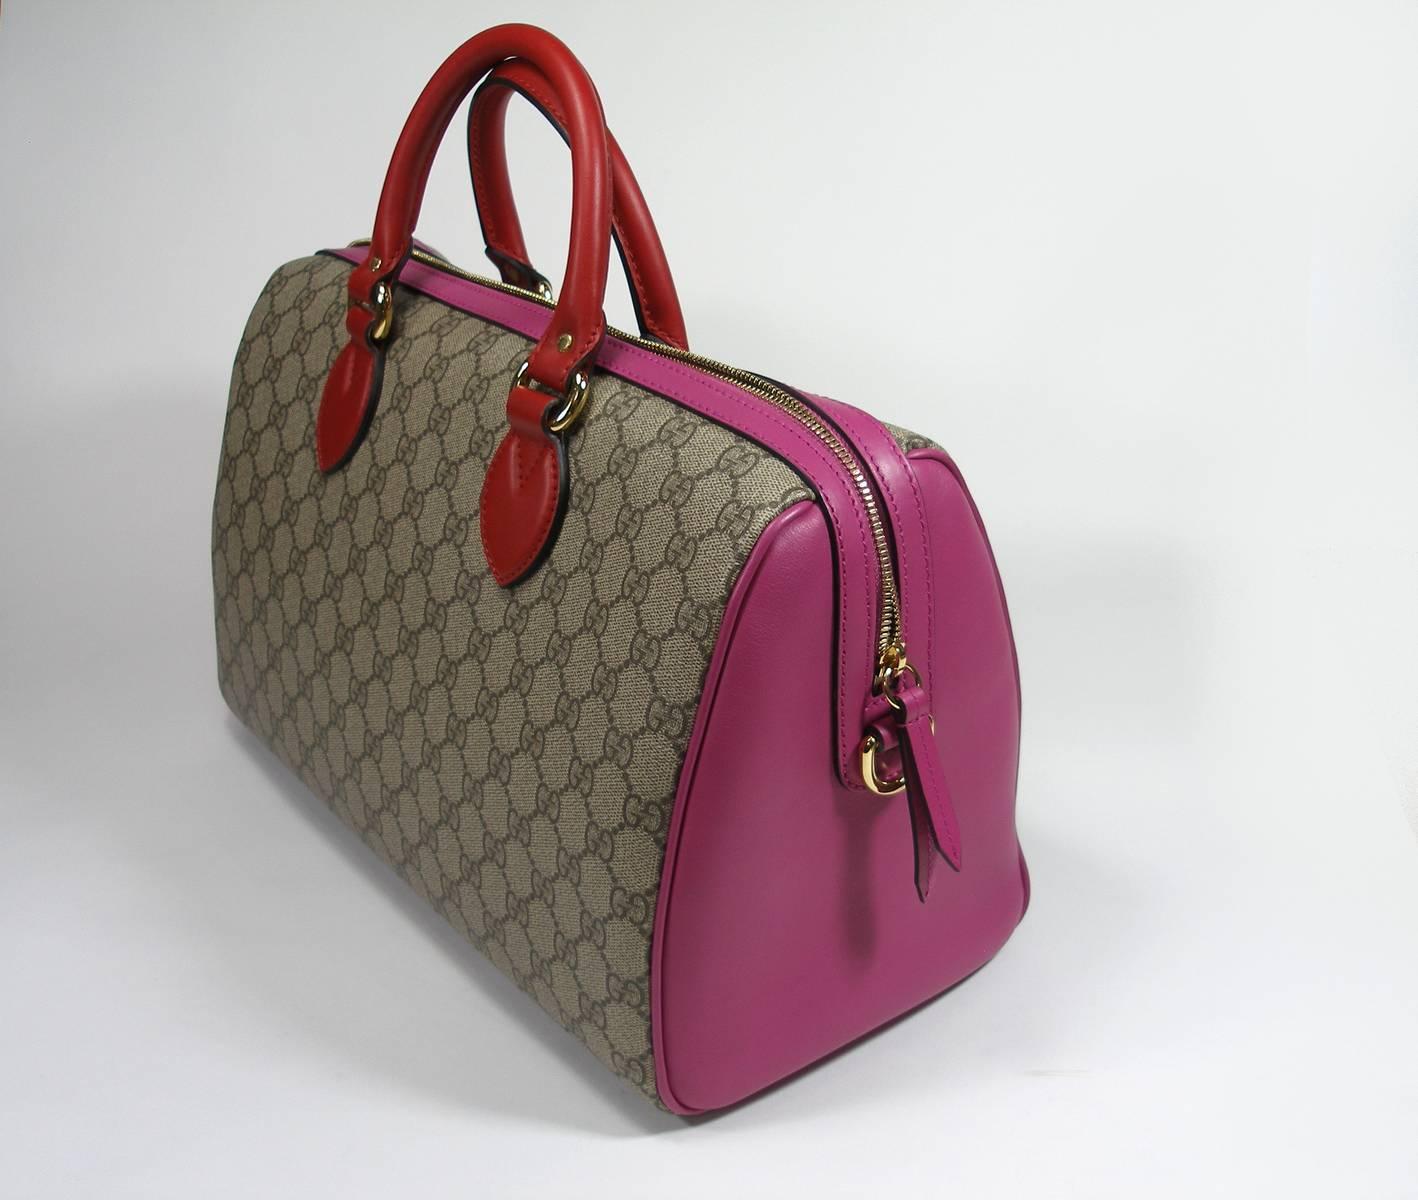 Magnifique Gucci Bag
Rare color / multicolour
BEIGE / PINK / RED
Canvas print with pink leather trim and sides
Red top handles
Adjustable removable long Strap
Hardware: Goldtone
Origine : italie
Collection Edition Limited 2016 
Code date inside (